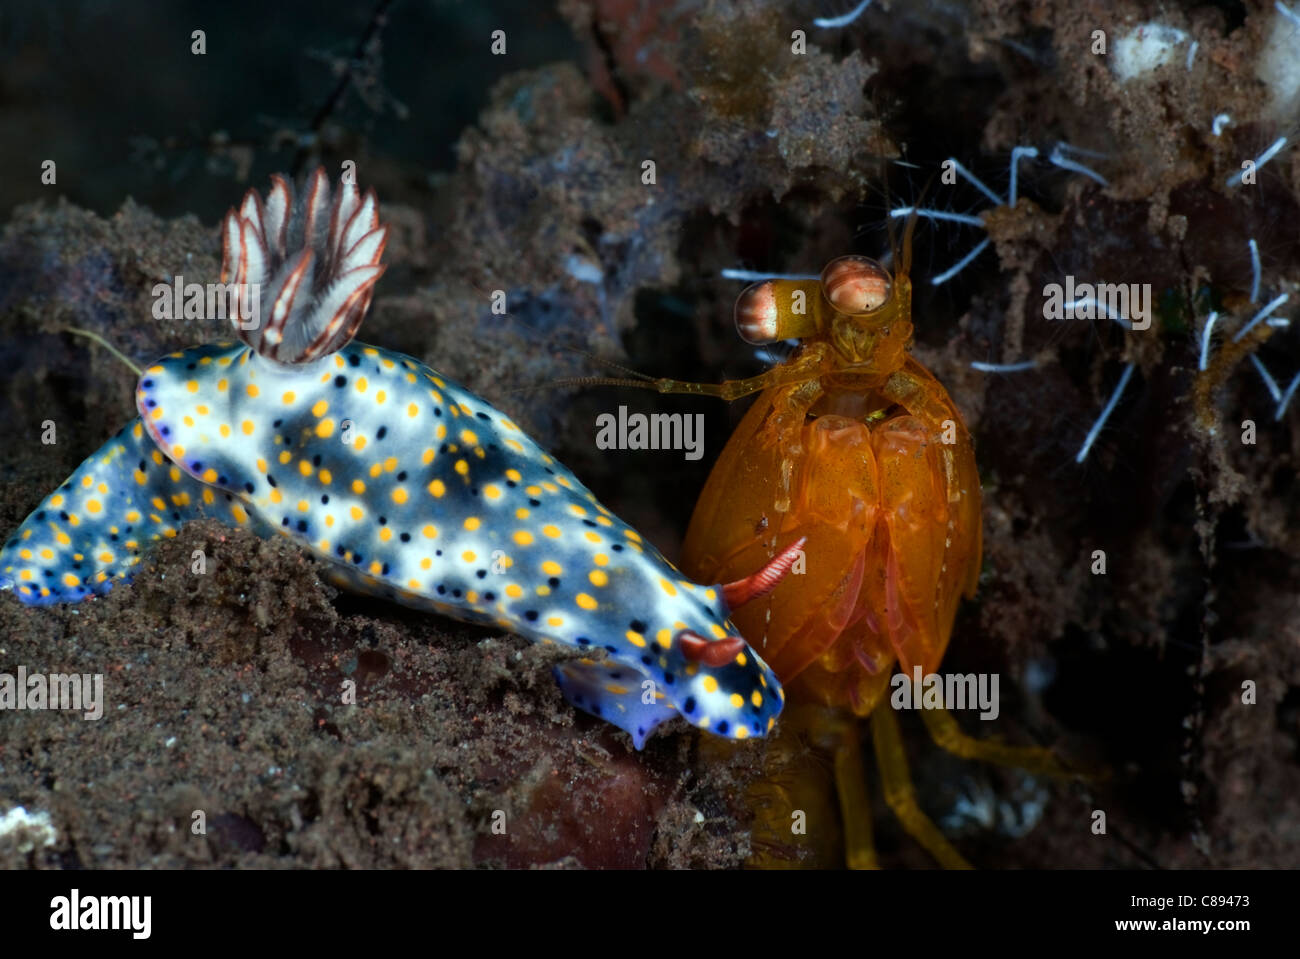 Golden Mantis shrimp watching a White Hypselodoris nudibranch with blue blotches and yellow and black spots and red rhinophores Stock Photo